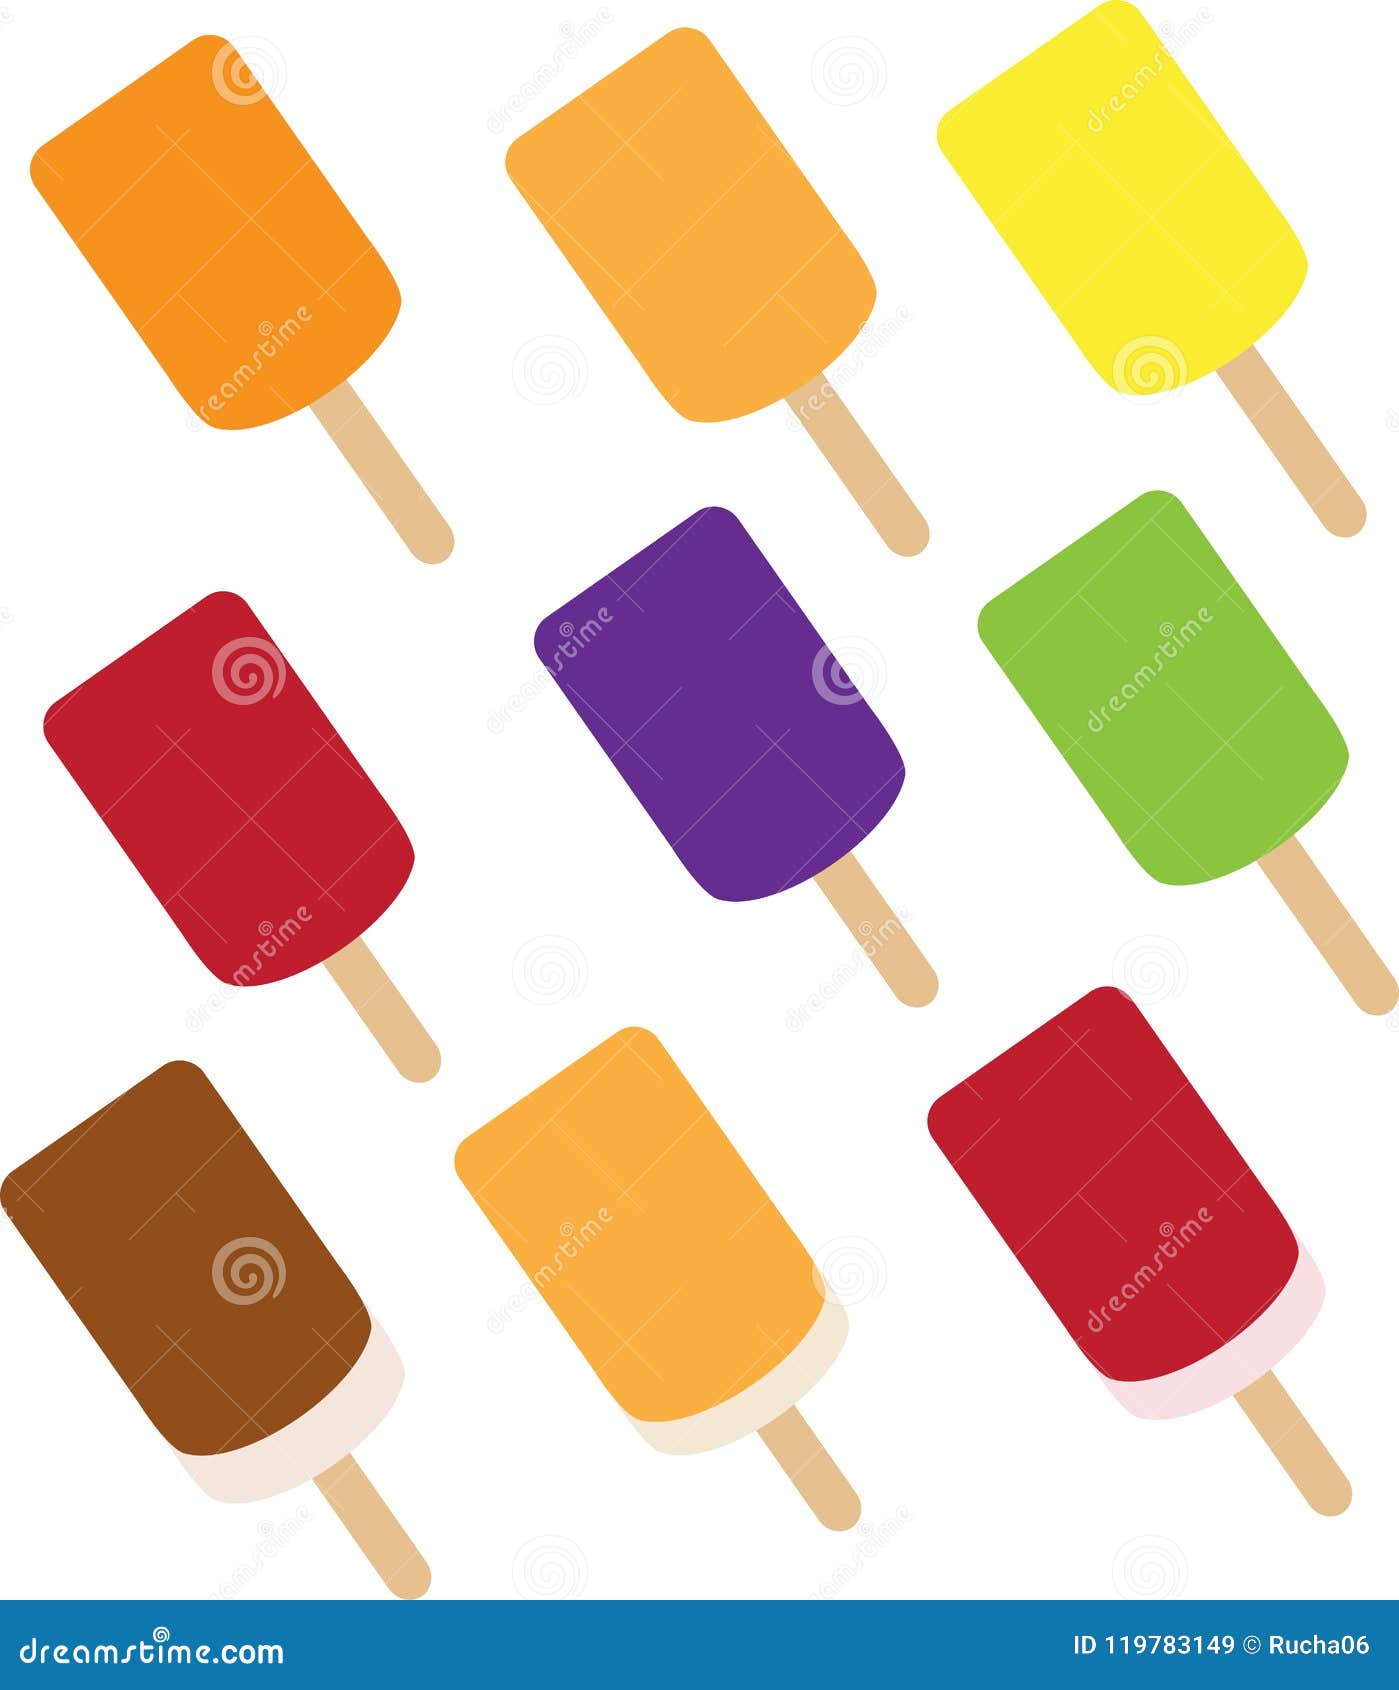 Cool Sweet Watery And Colorful Ice Cream Candies Stock Vector Illustration Of Elements Orange